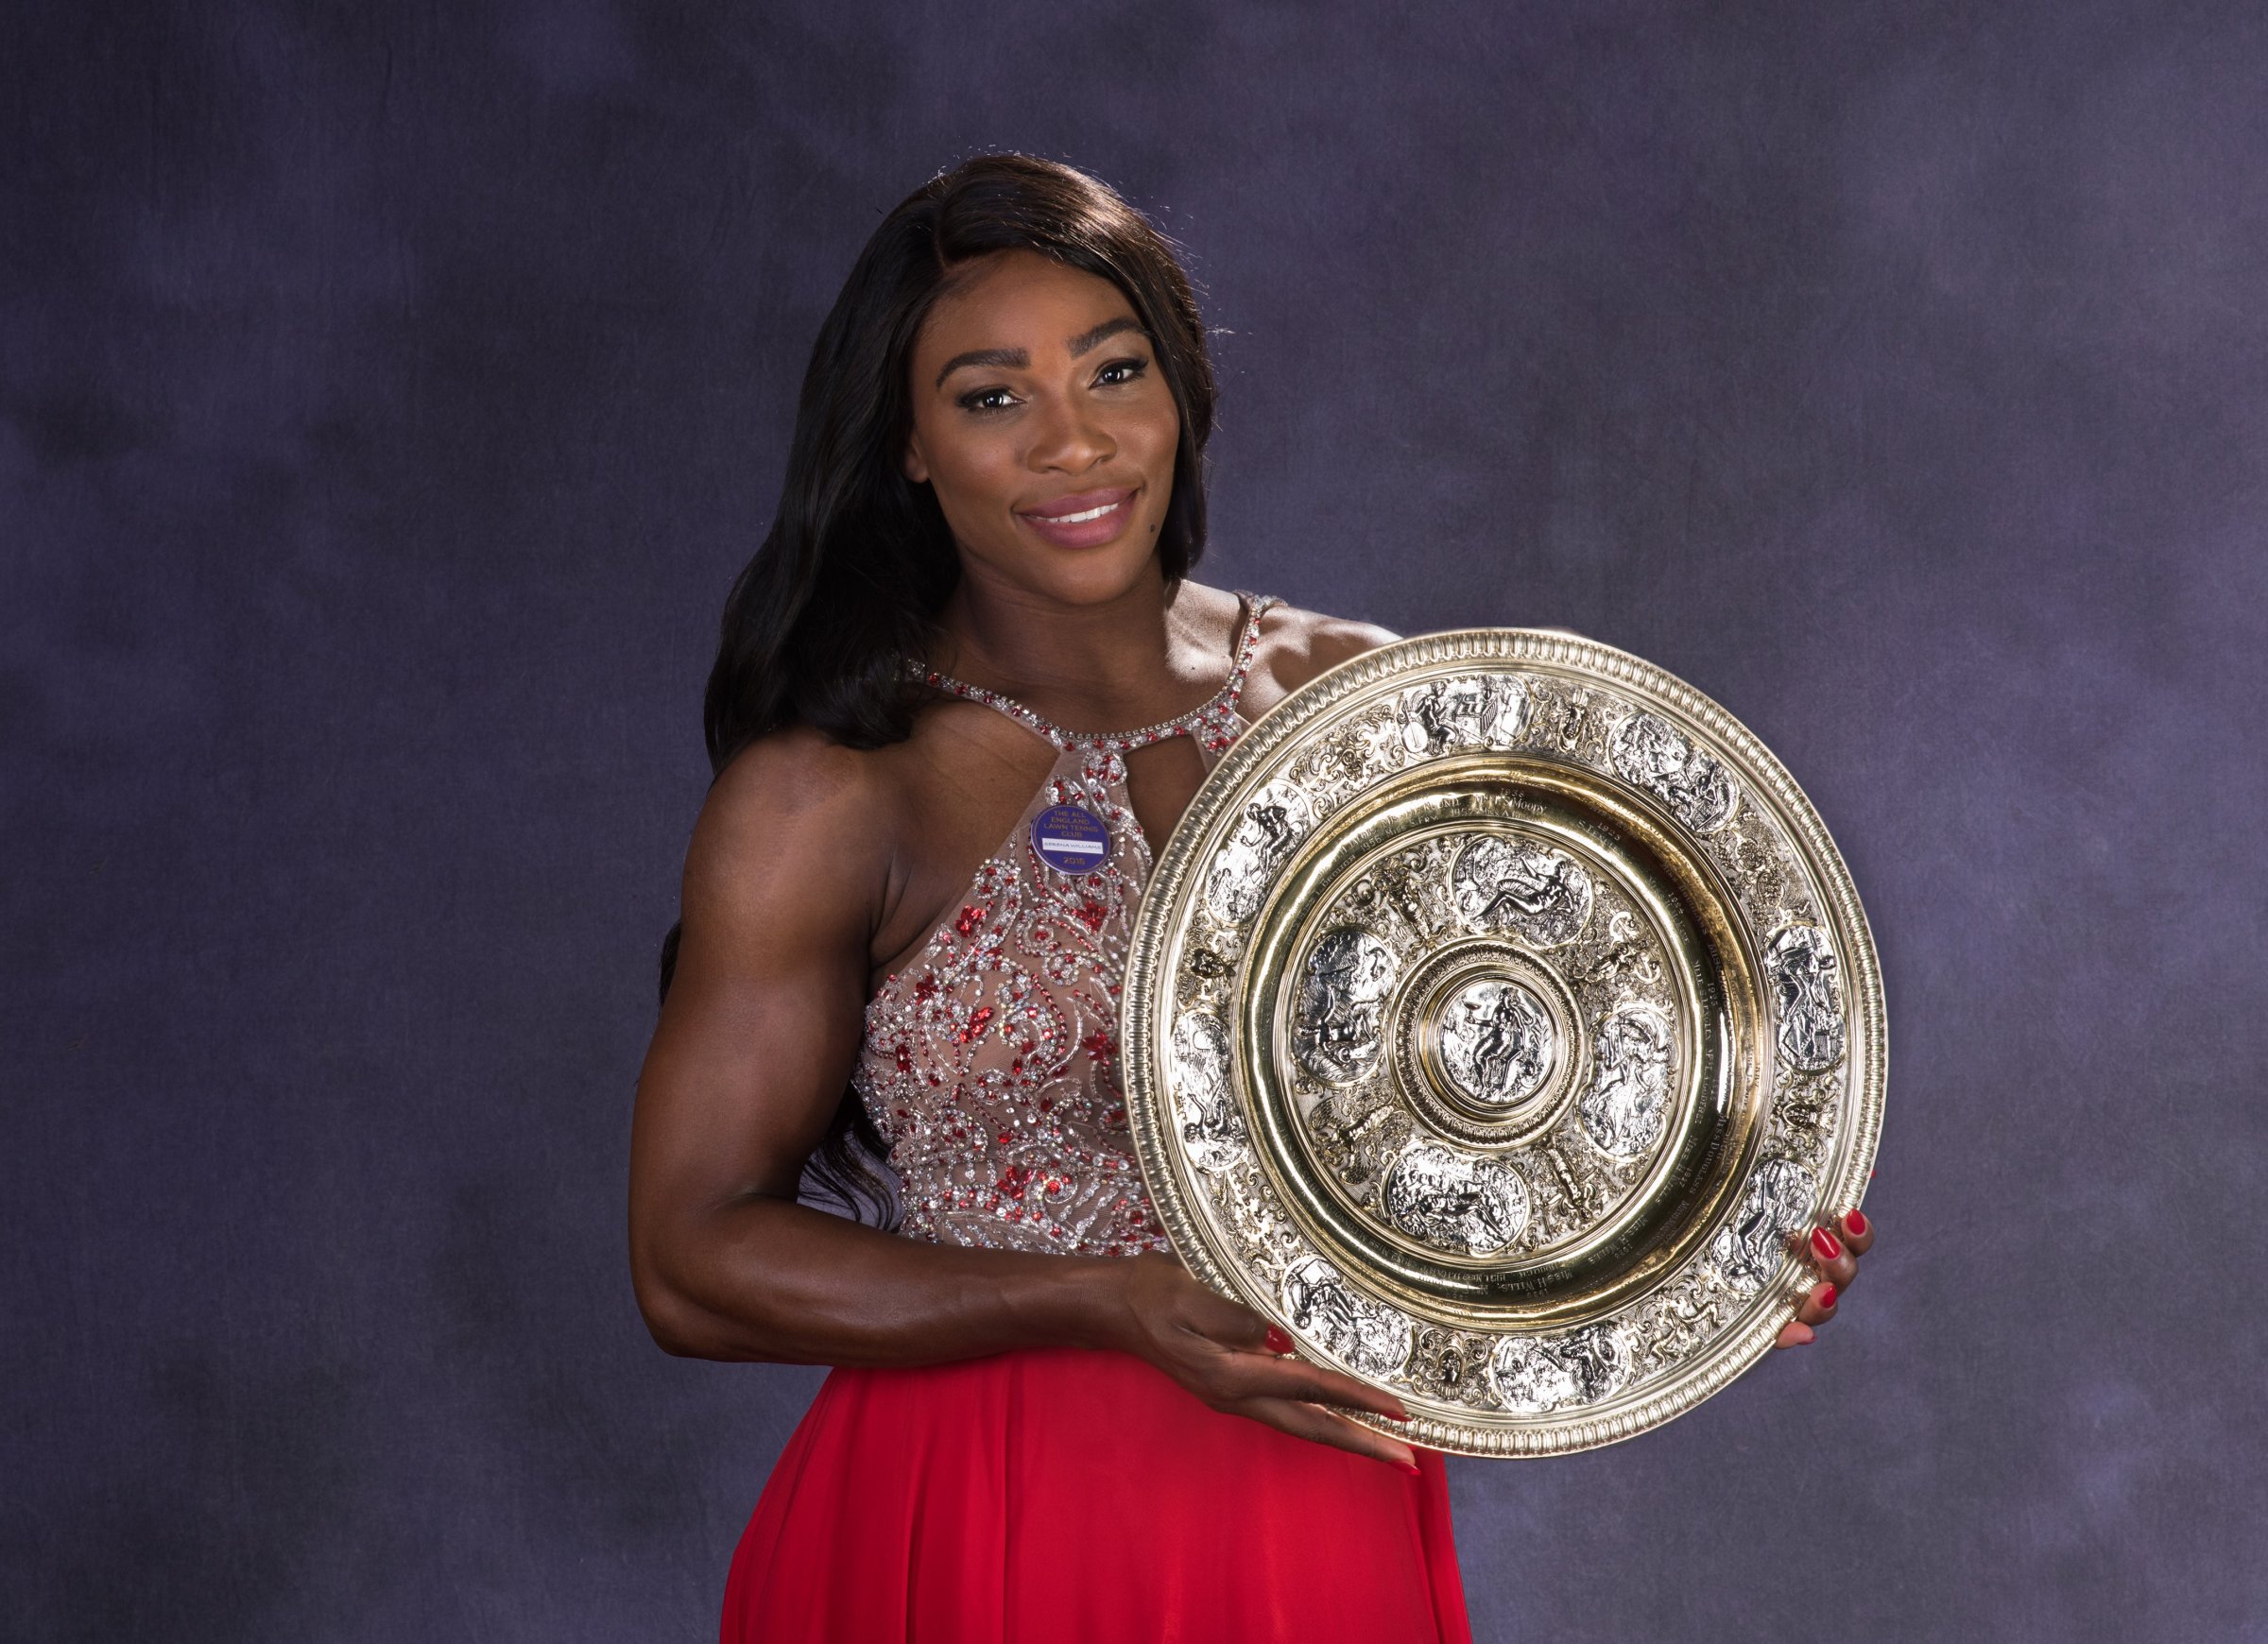 Wimbledon ladies singles Tennis Champion Serena Williams of the United States poses with the trophy at the Wimbledon Champions Dinner 2016 at the Guild Hall on July 10, 2016 in London, England.